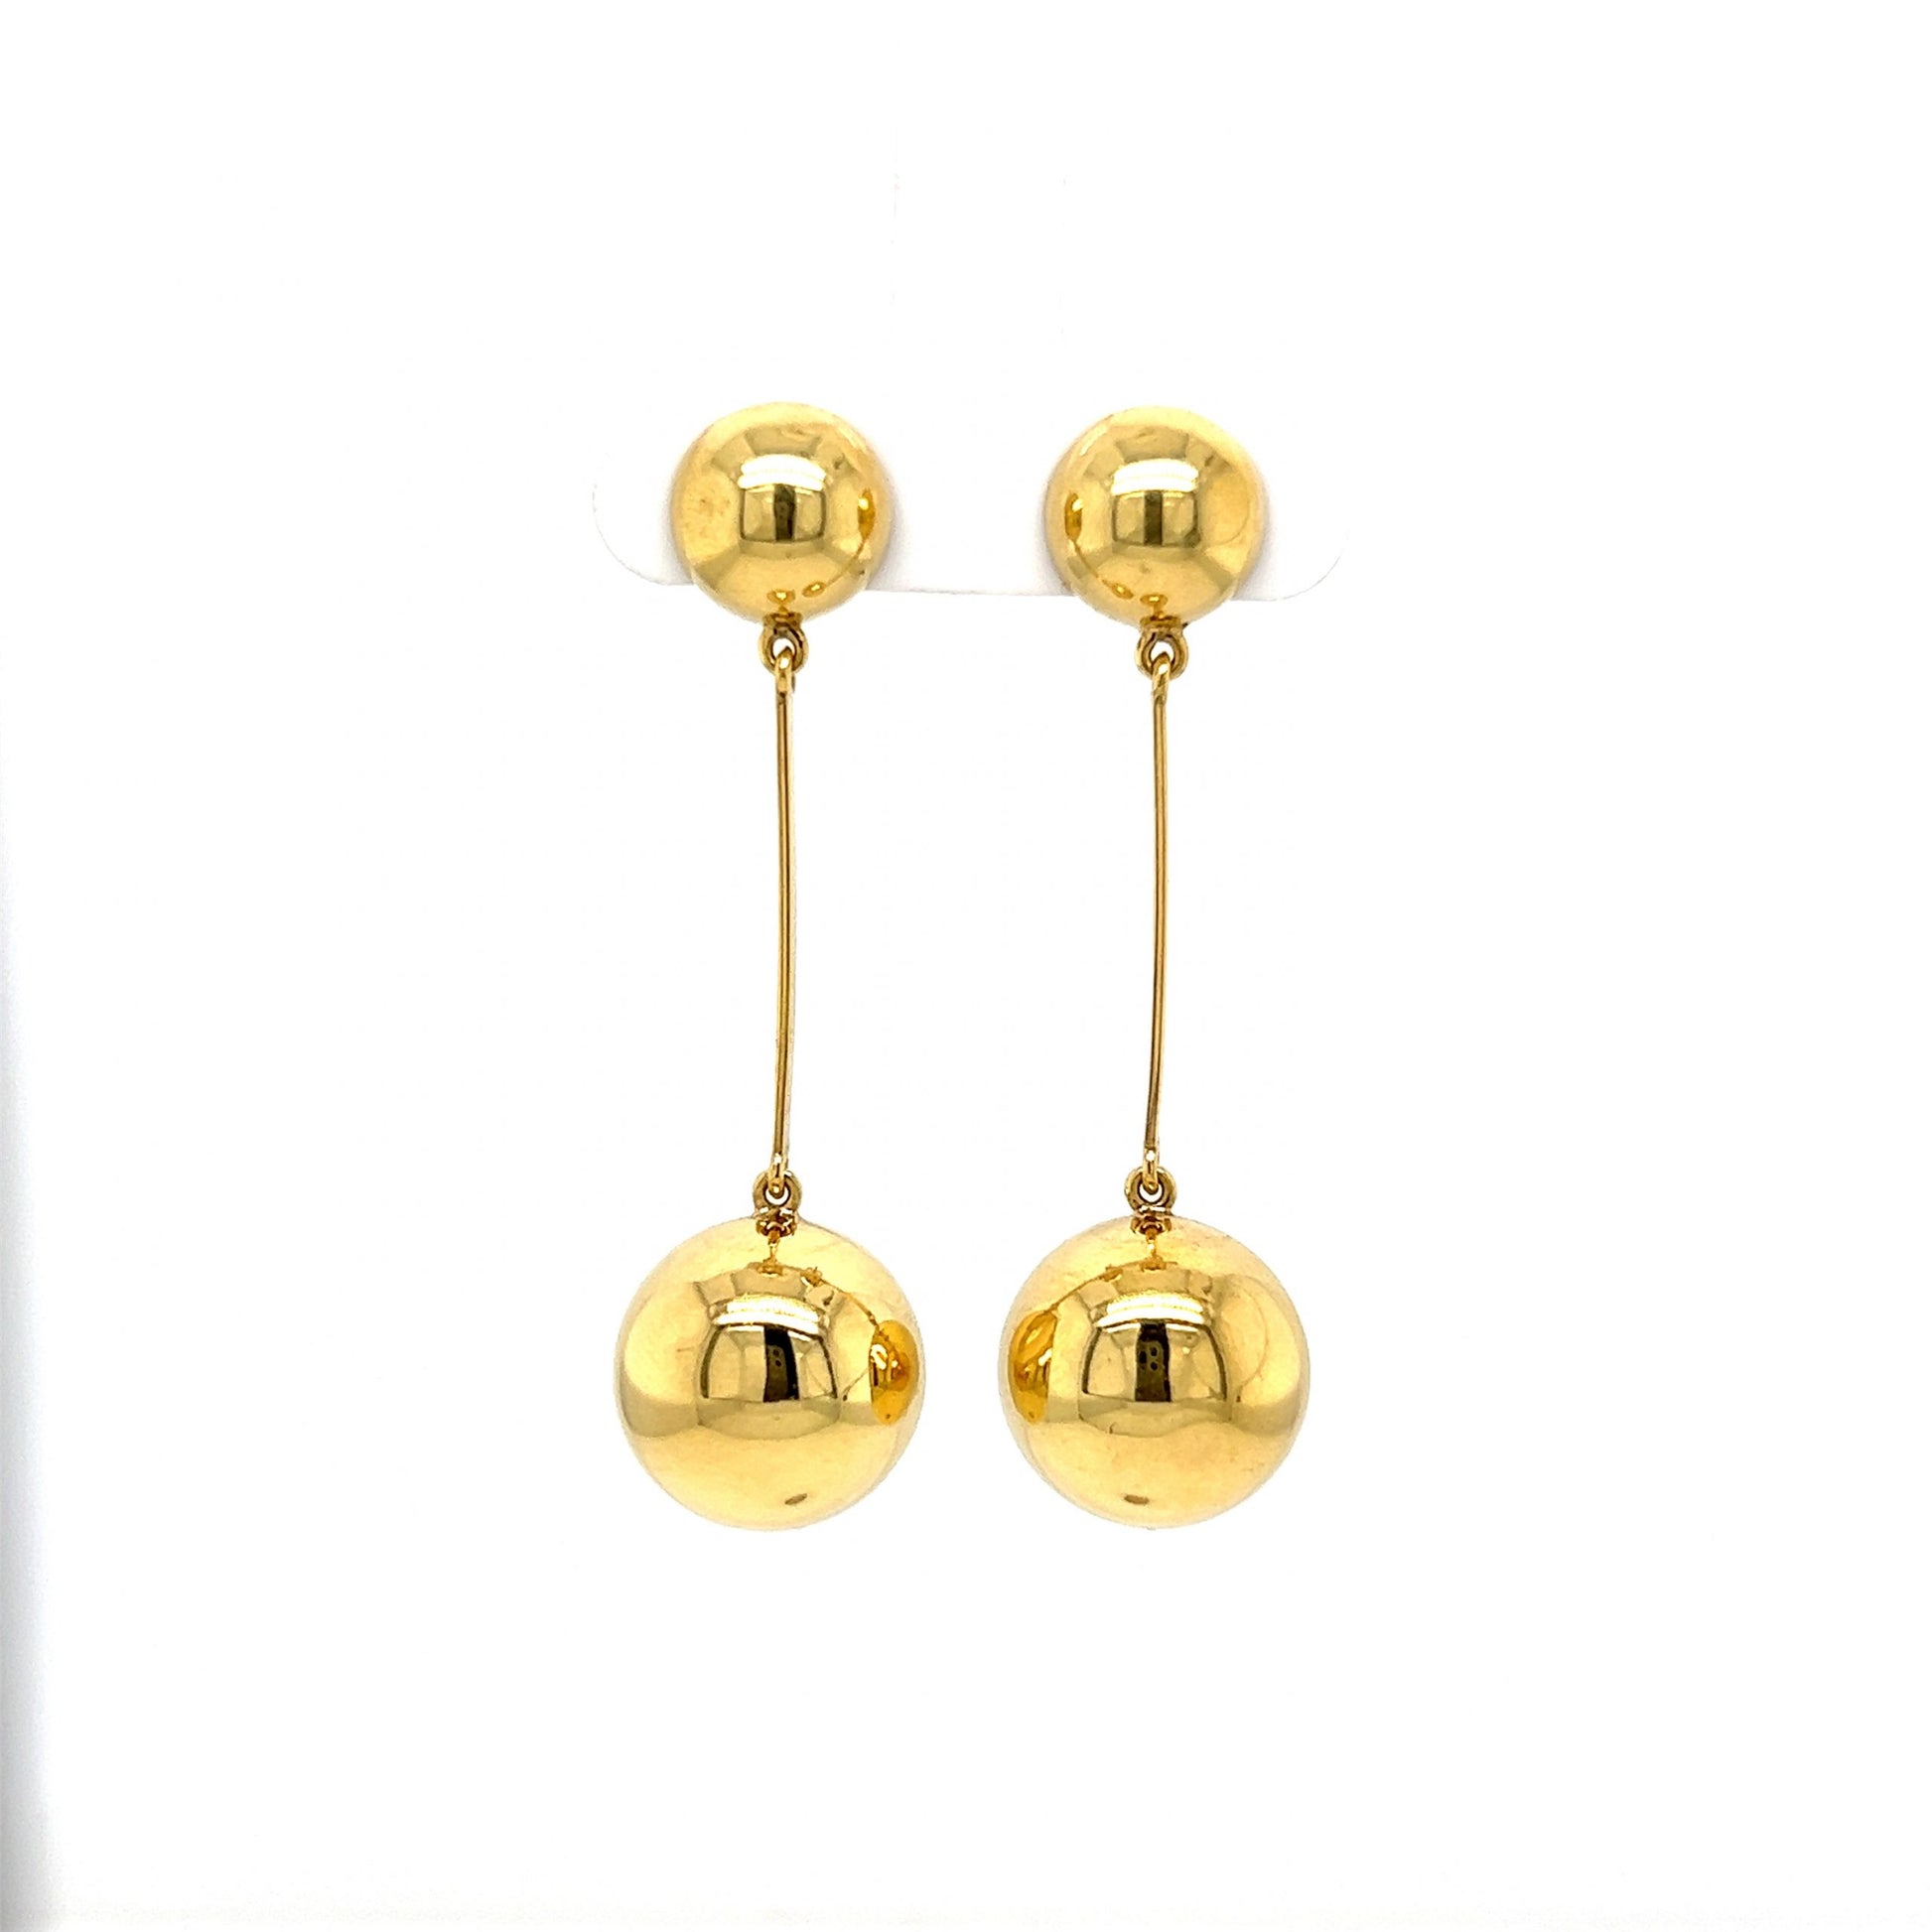 Mid-Century Sphere Drop Earrings in 18k Yellow GoldComposition: 18 Karat Yellow Gold Total Gram Weight: 3.8 g